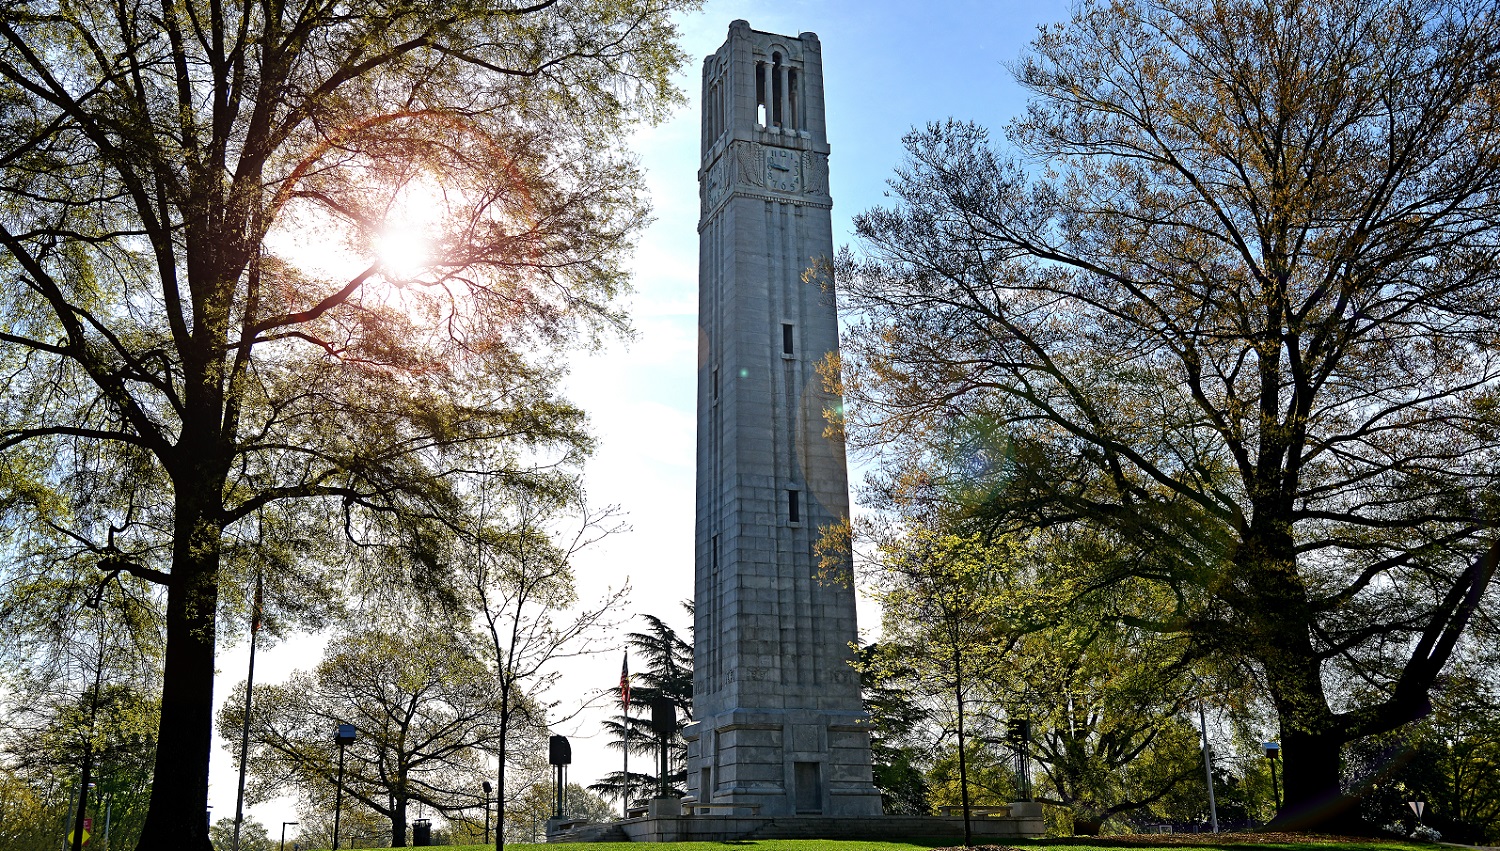 Belltower - Fall Board Meeting and Career Fair Move online - Forest Biomaterials NC State University